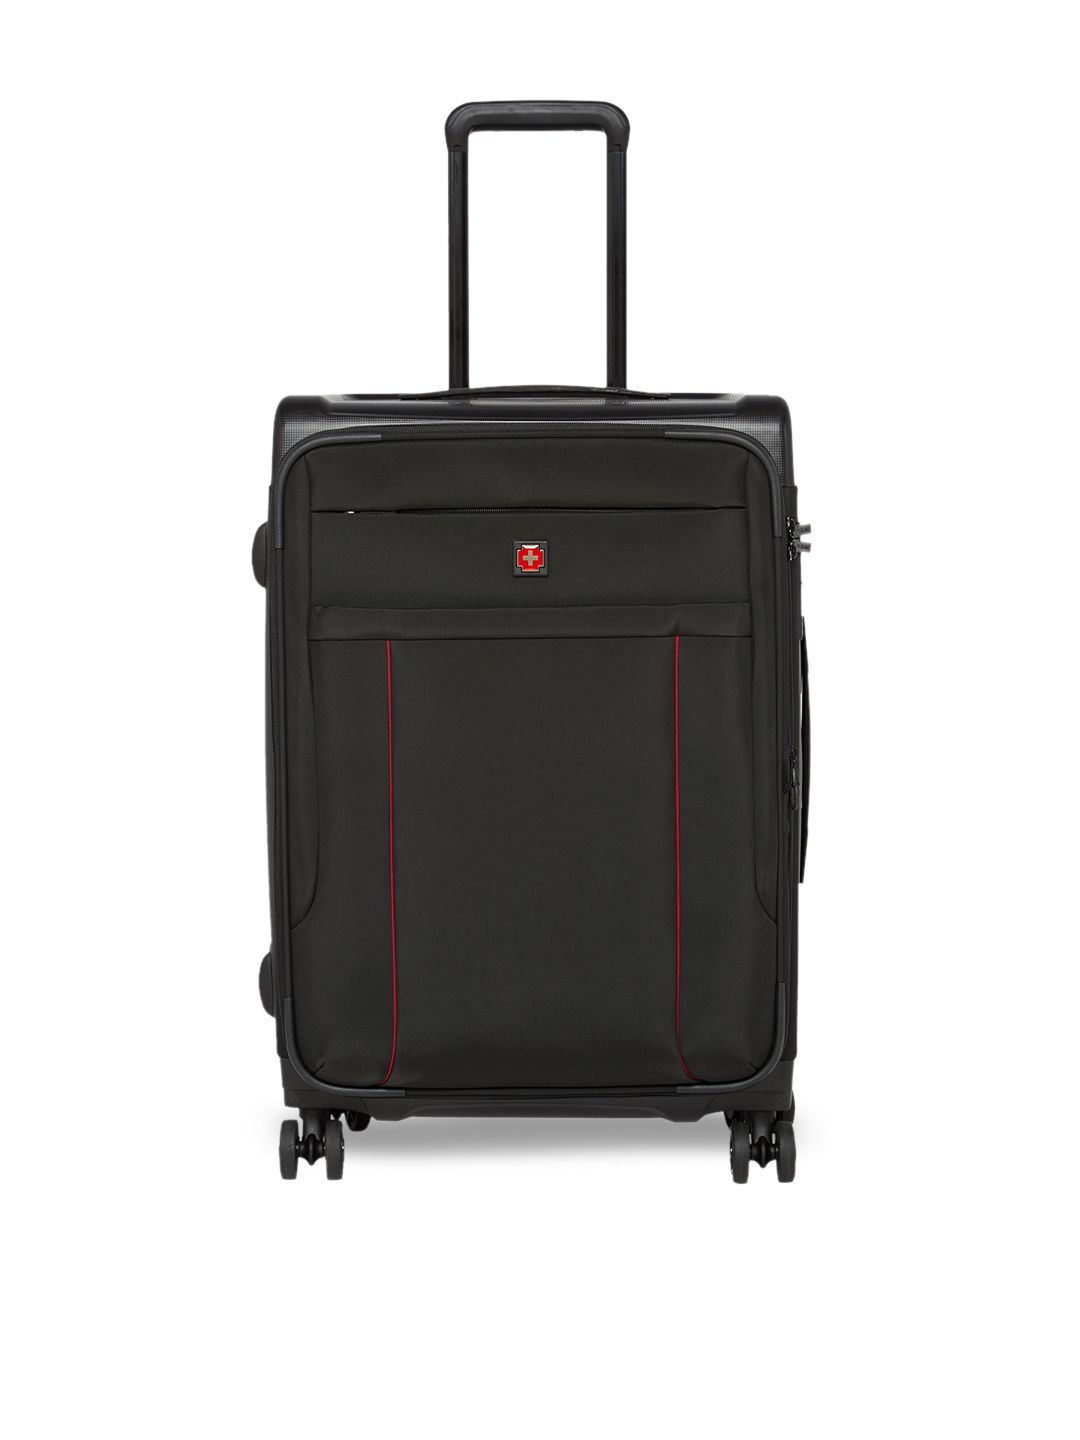 SWISS BRAND Unisex Black Solid PERTH Soft-Sided Cabin Trolley Suitcase Price in India